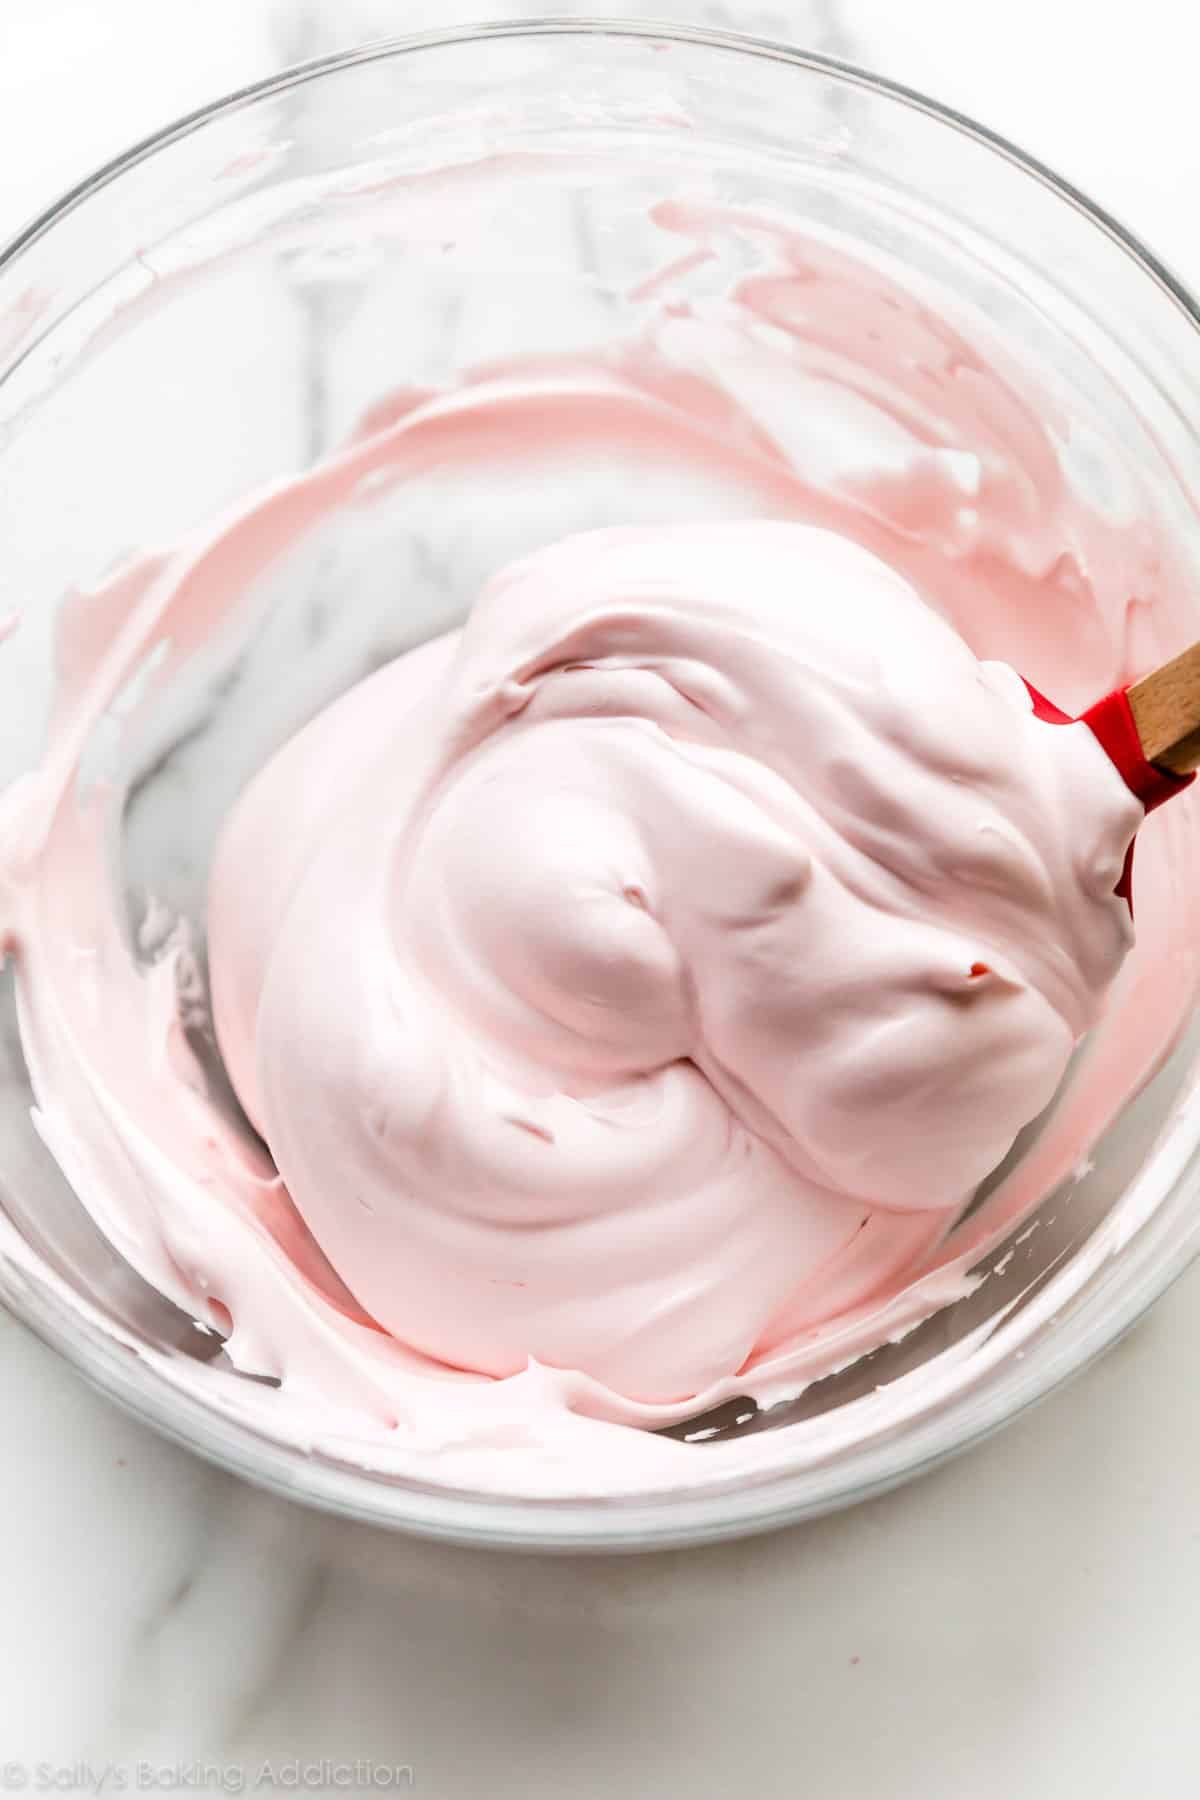 whipped egg whites tinted with pink food coloring